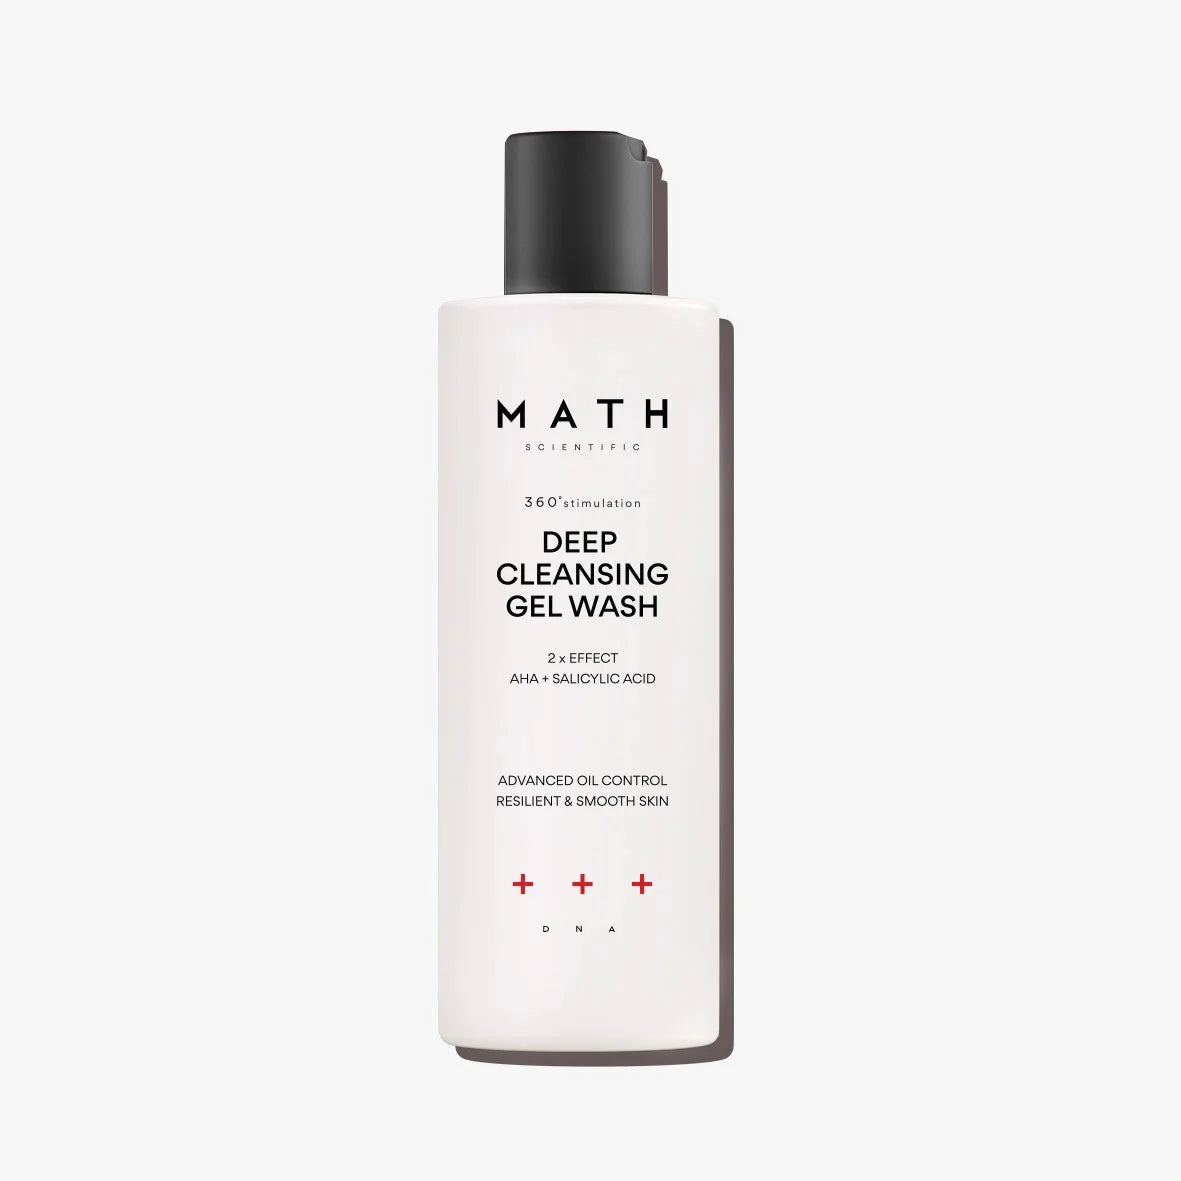 DEEP CLEANSING GEL WASH to fight acne and blemishes